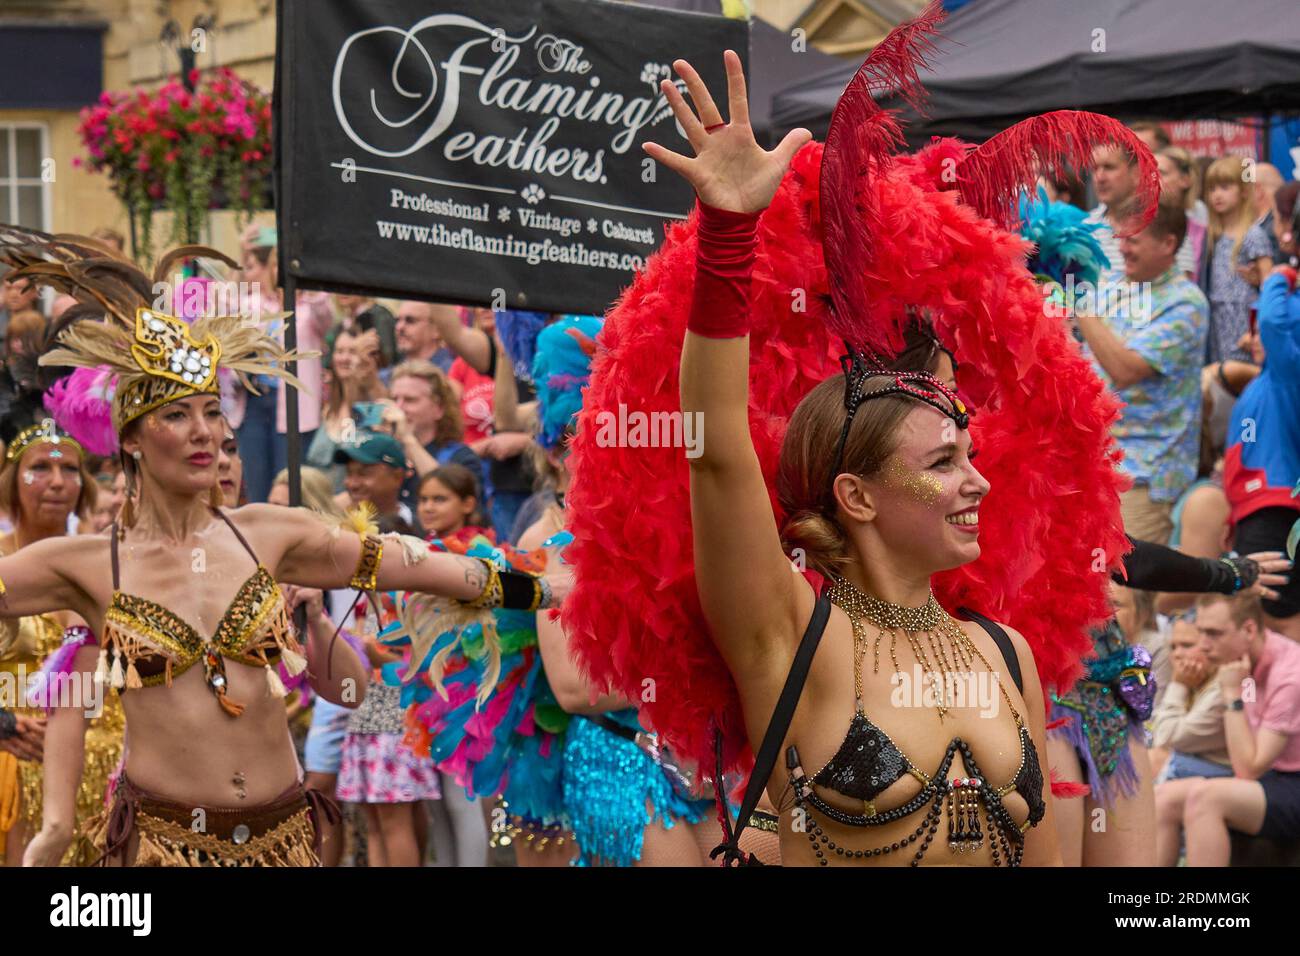 Dancers and musicians dressed in ornate costumes parade through